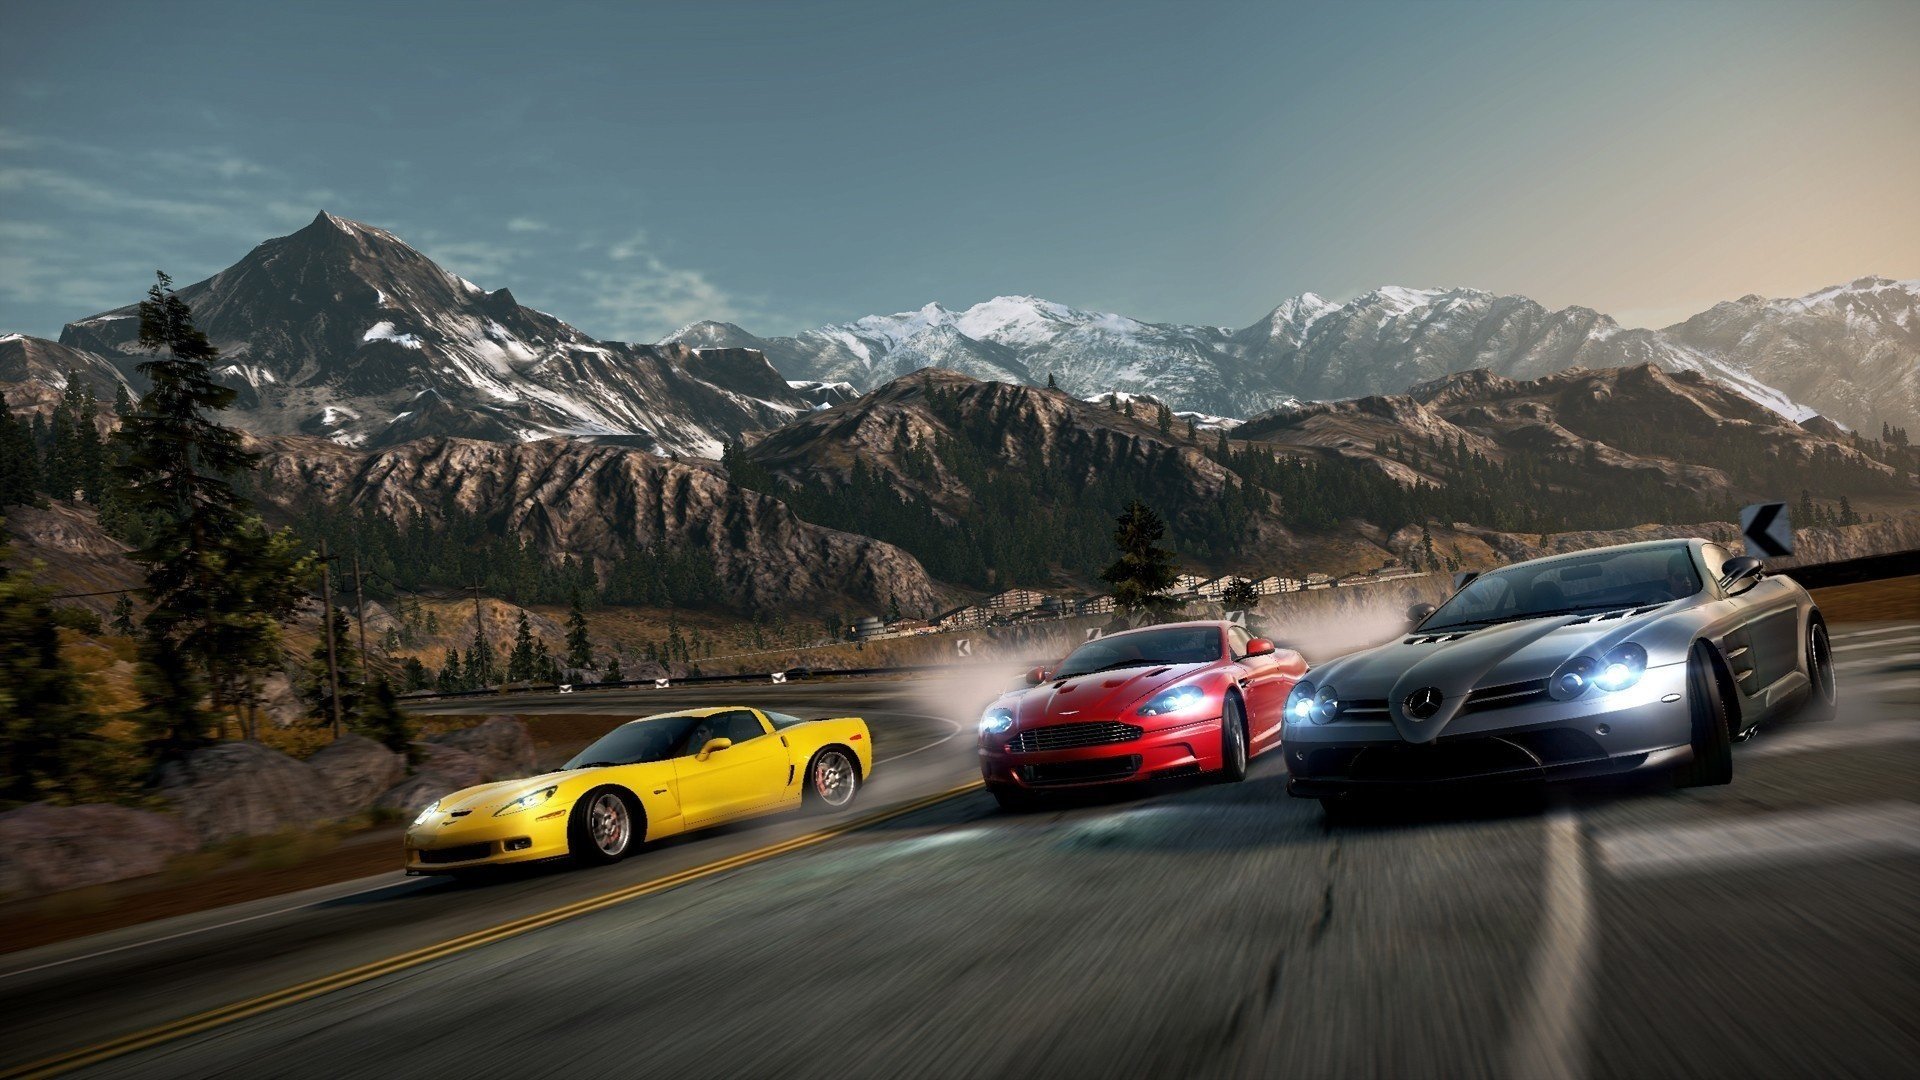 Need for speed, a race on a cool supercars